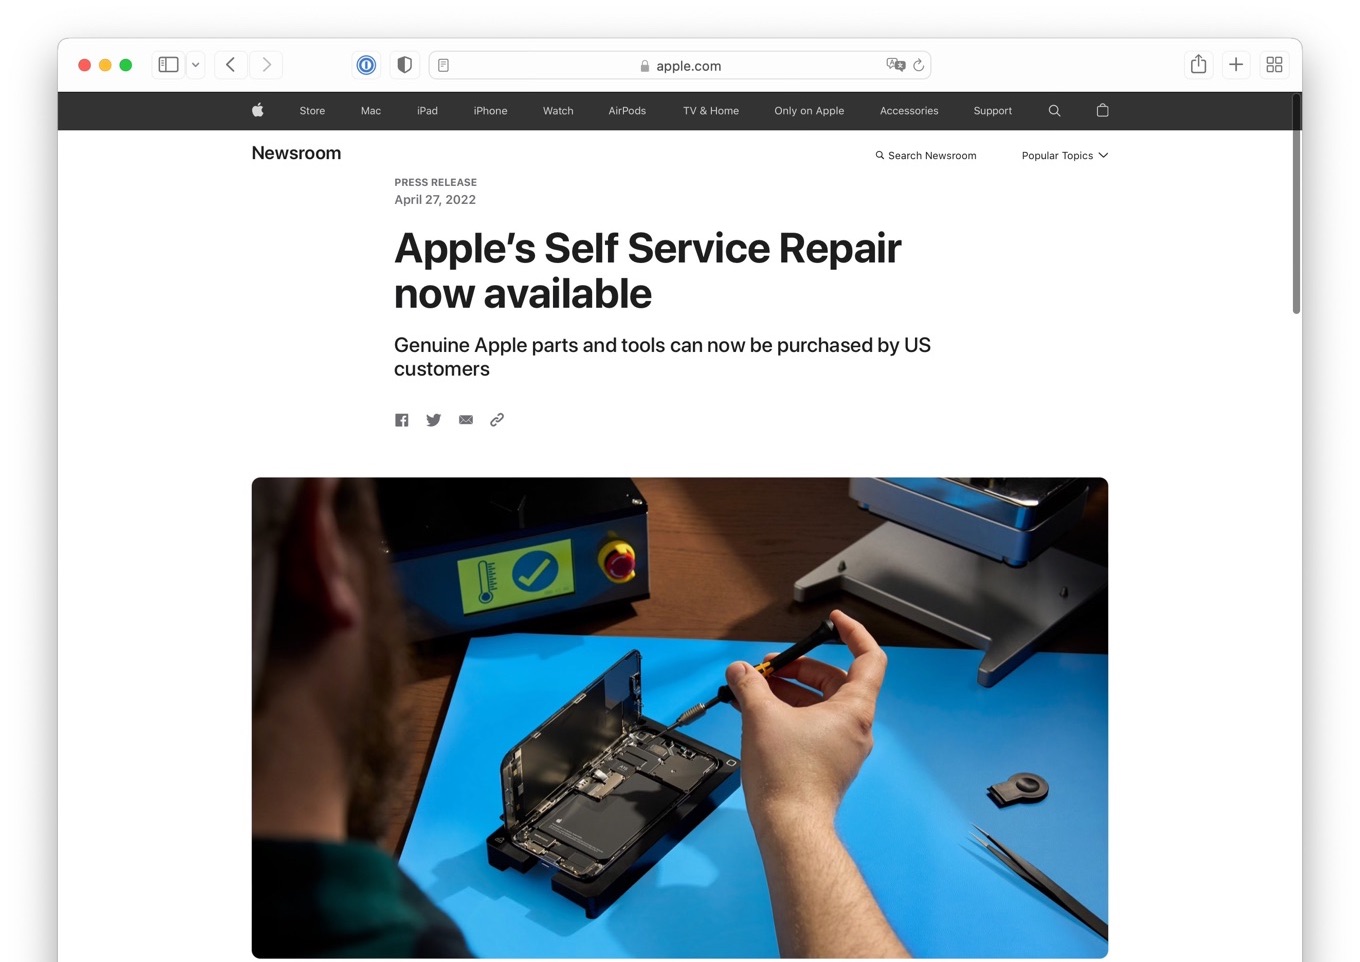 Self Service Repair is now available